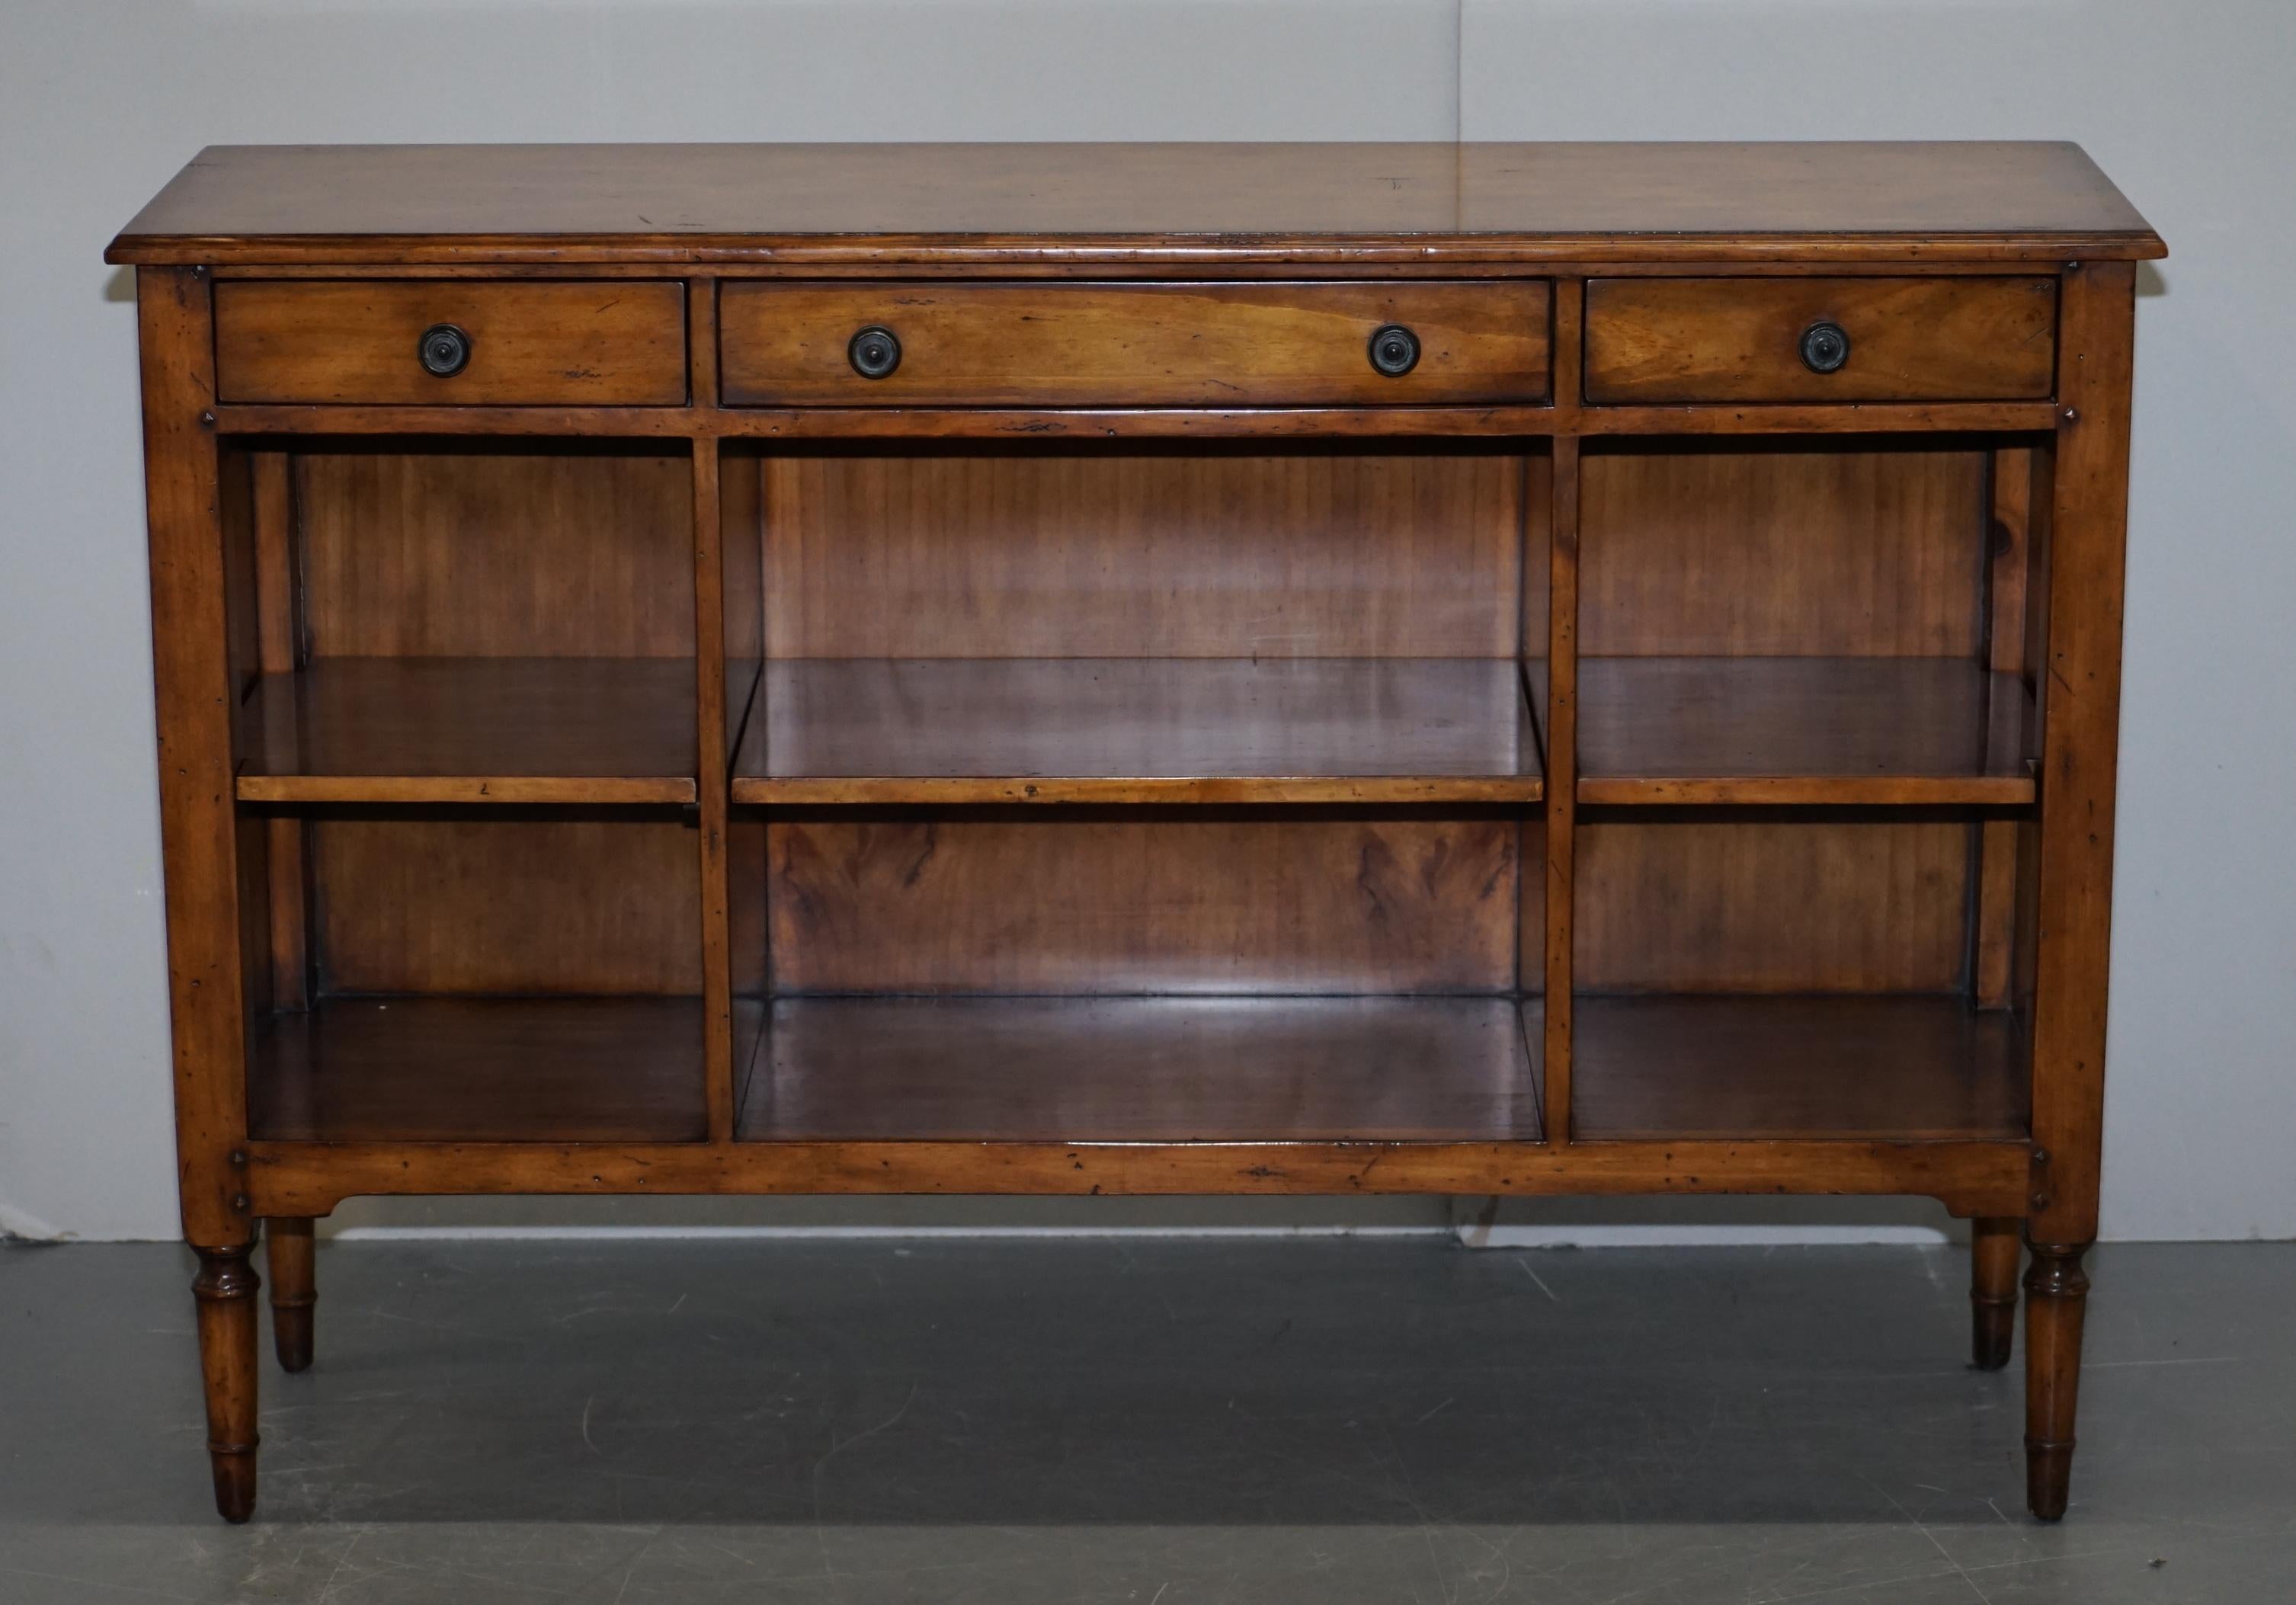 We are delighted to offer for sale this very well made Multiyork solid English oak sideboard bookcase with drawers

A very good looking and well made piece, it has two medium and one large drawers and four medium and two large shelves. The shelves